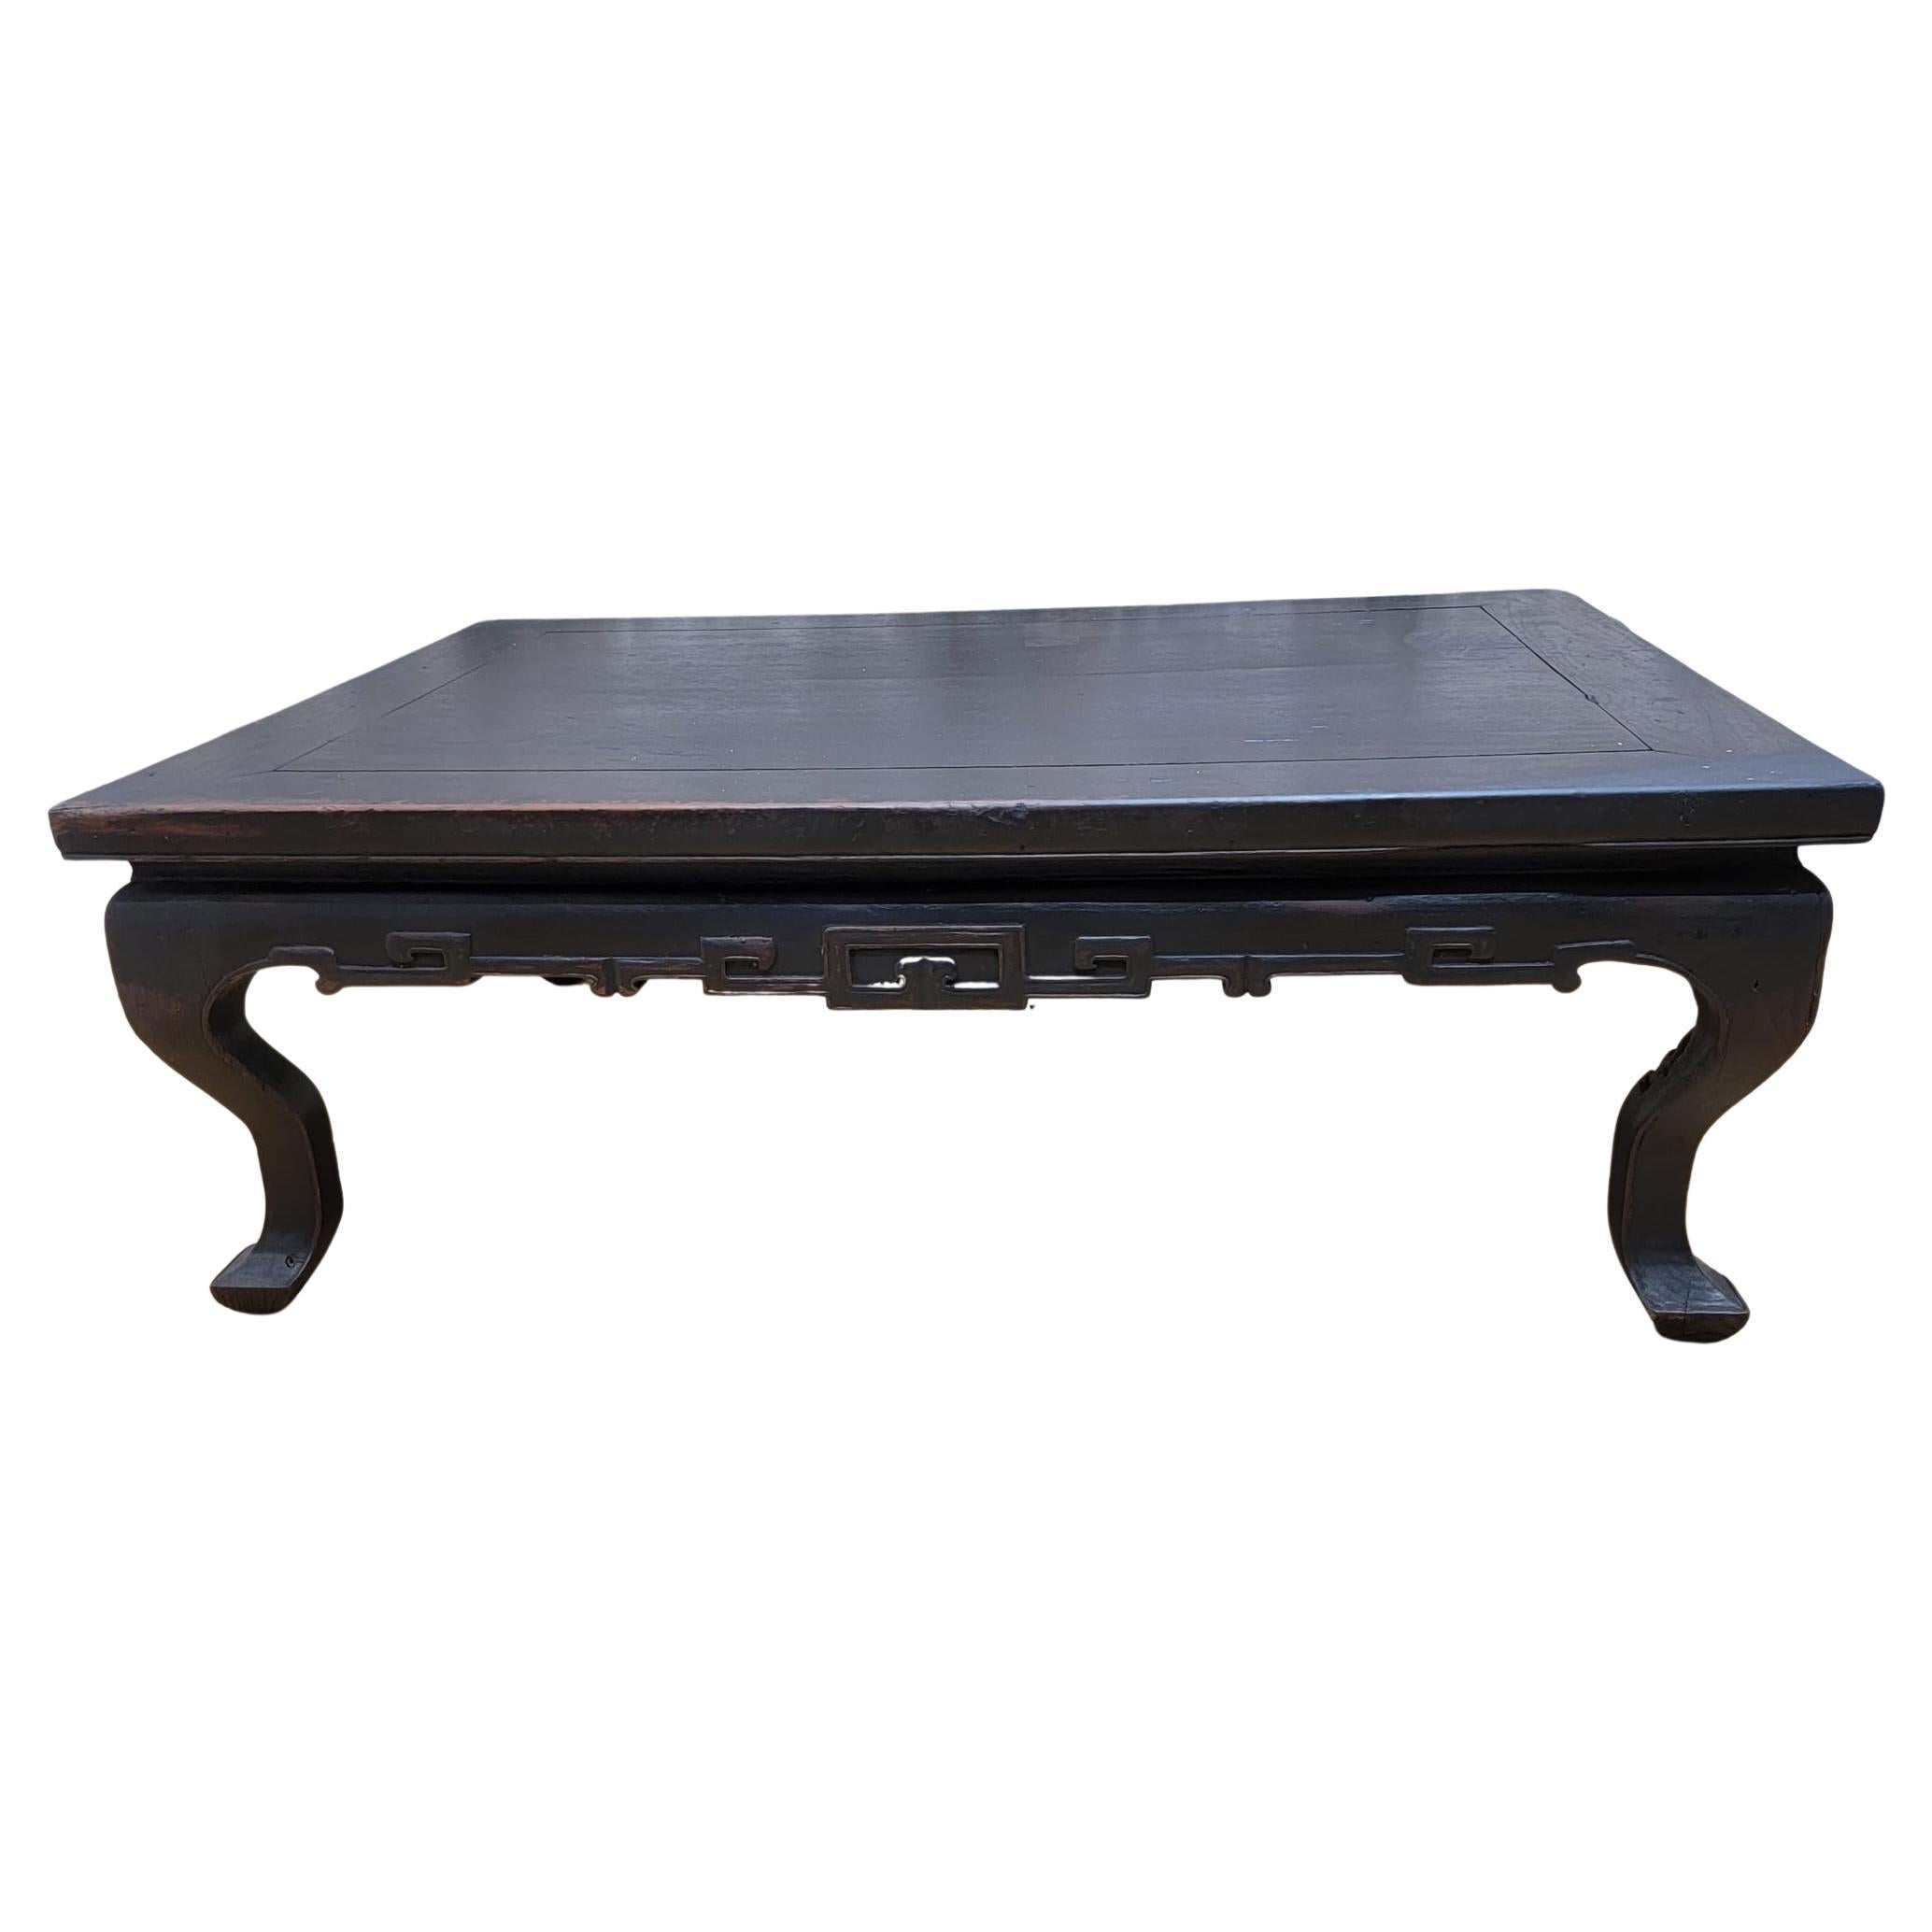 Antique Shanxi Province Rare Elm Table with Hand Carved Apron

circa: 1900

Dimensions:

W: 40.5”
D: 30”
H: 14”